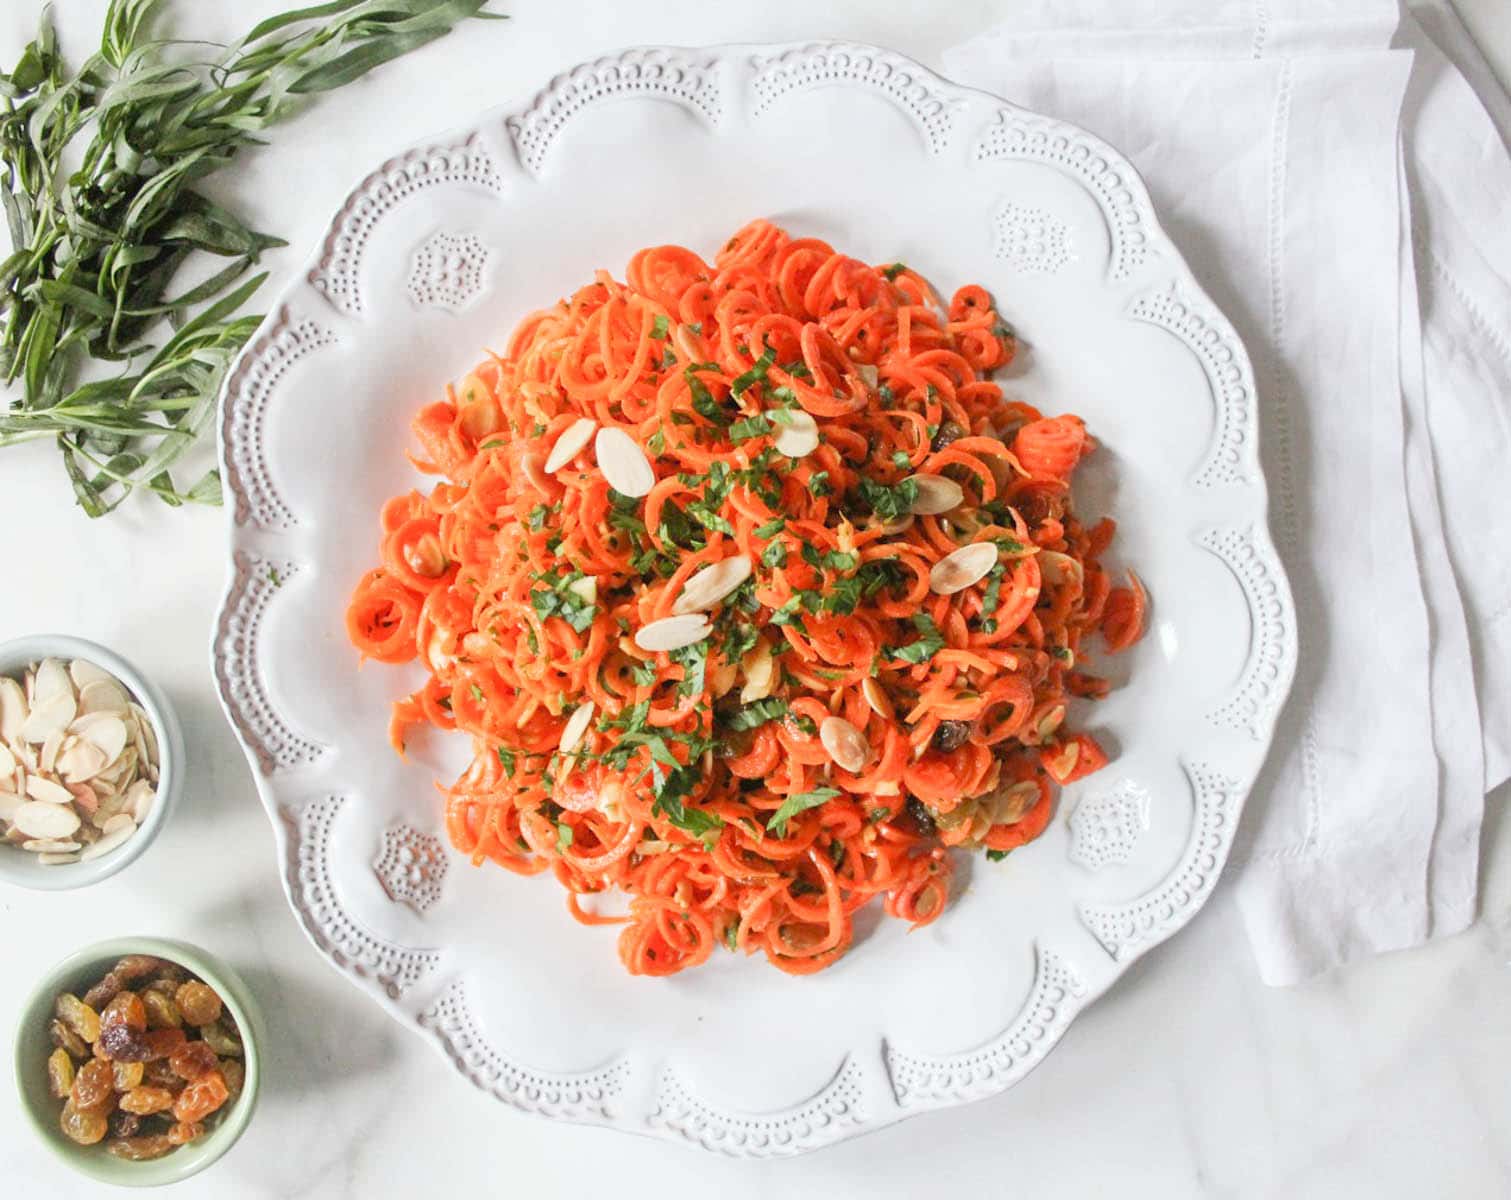 Spiralized-Carrot-Salad-with-Herbs-and-Toasted-Almonds-1